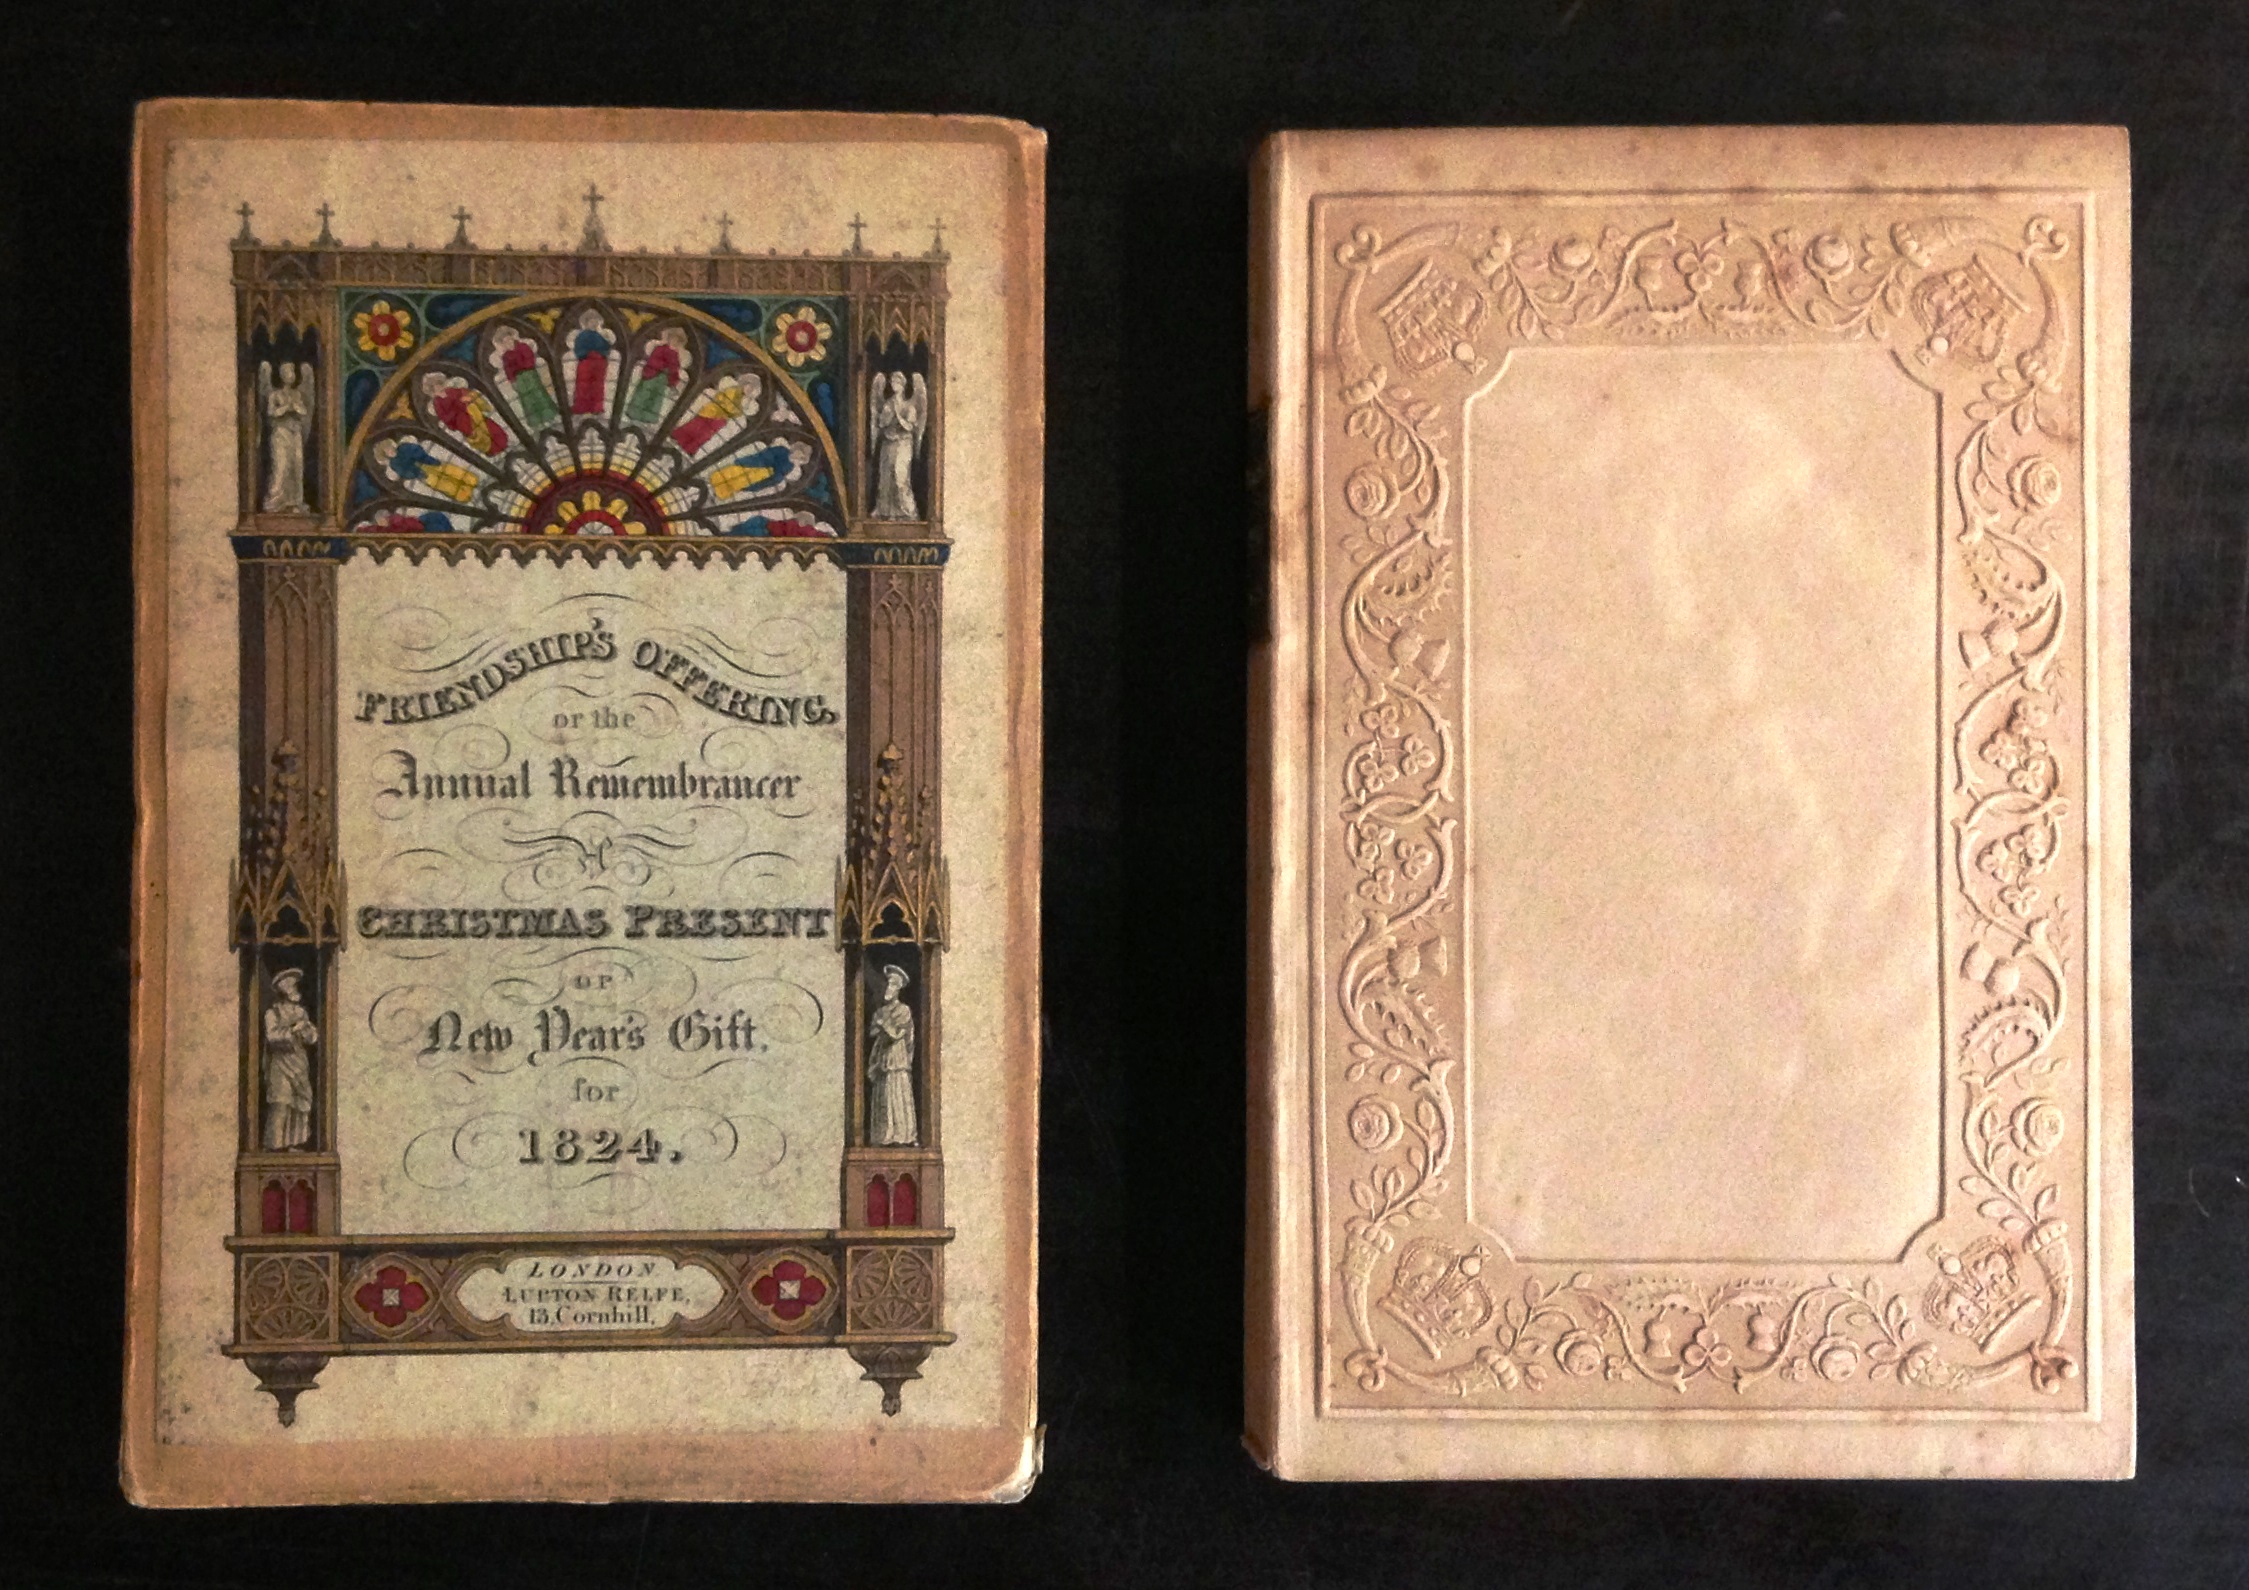 Friendship's Offering, or the Annual Remembrancer, a Christmas Present or New Year's Gift (London: Lupton Relfe, 1823) was one of the earliest English "gift books," The fragile binding of embossed paper boards was given added protection (and a marketing boost) by a protective cardboard case, onto which was pasted a hand-colored engraved title.